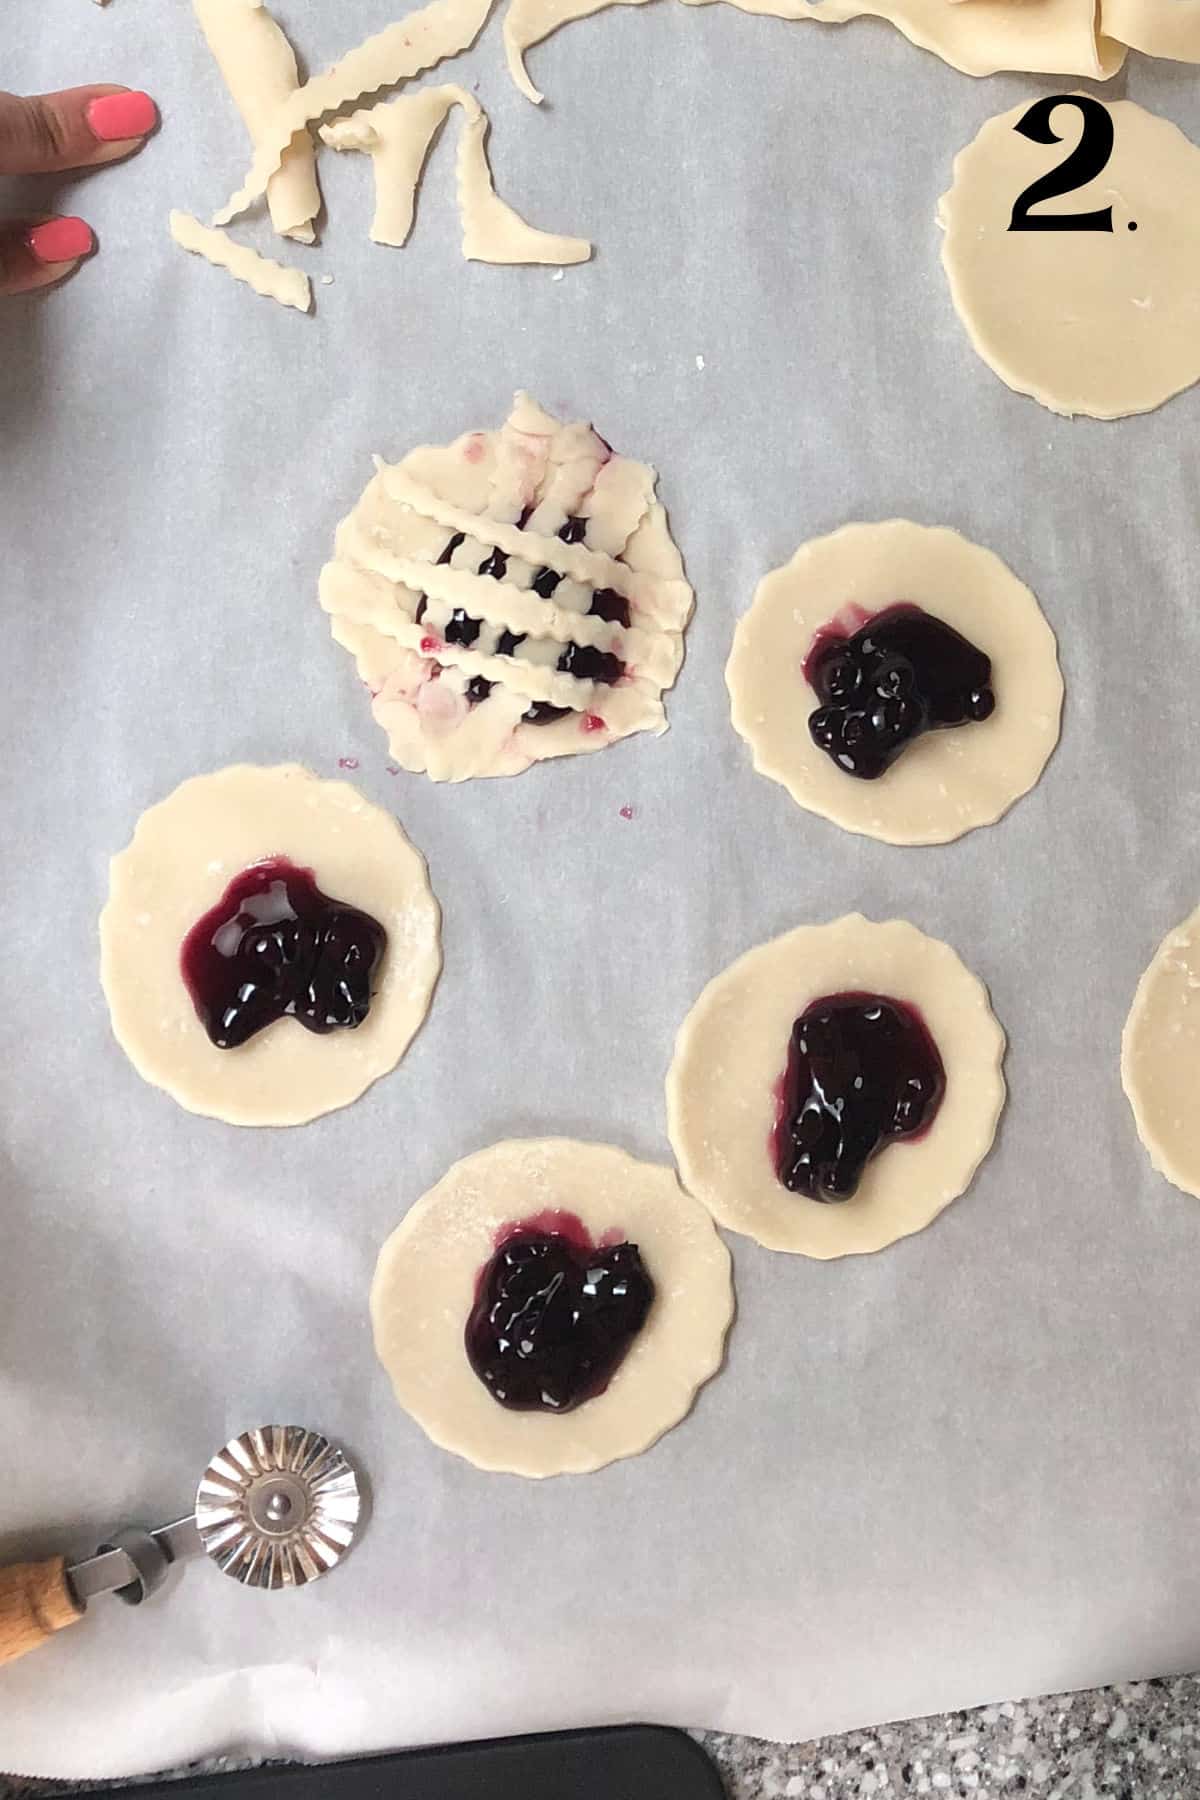 How to Make Blueberry Hand Pies Step 2 - adding blueberry filling.